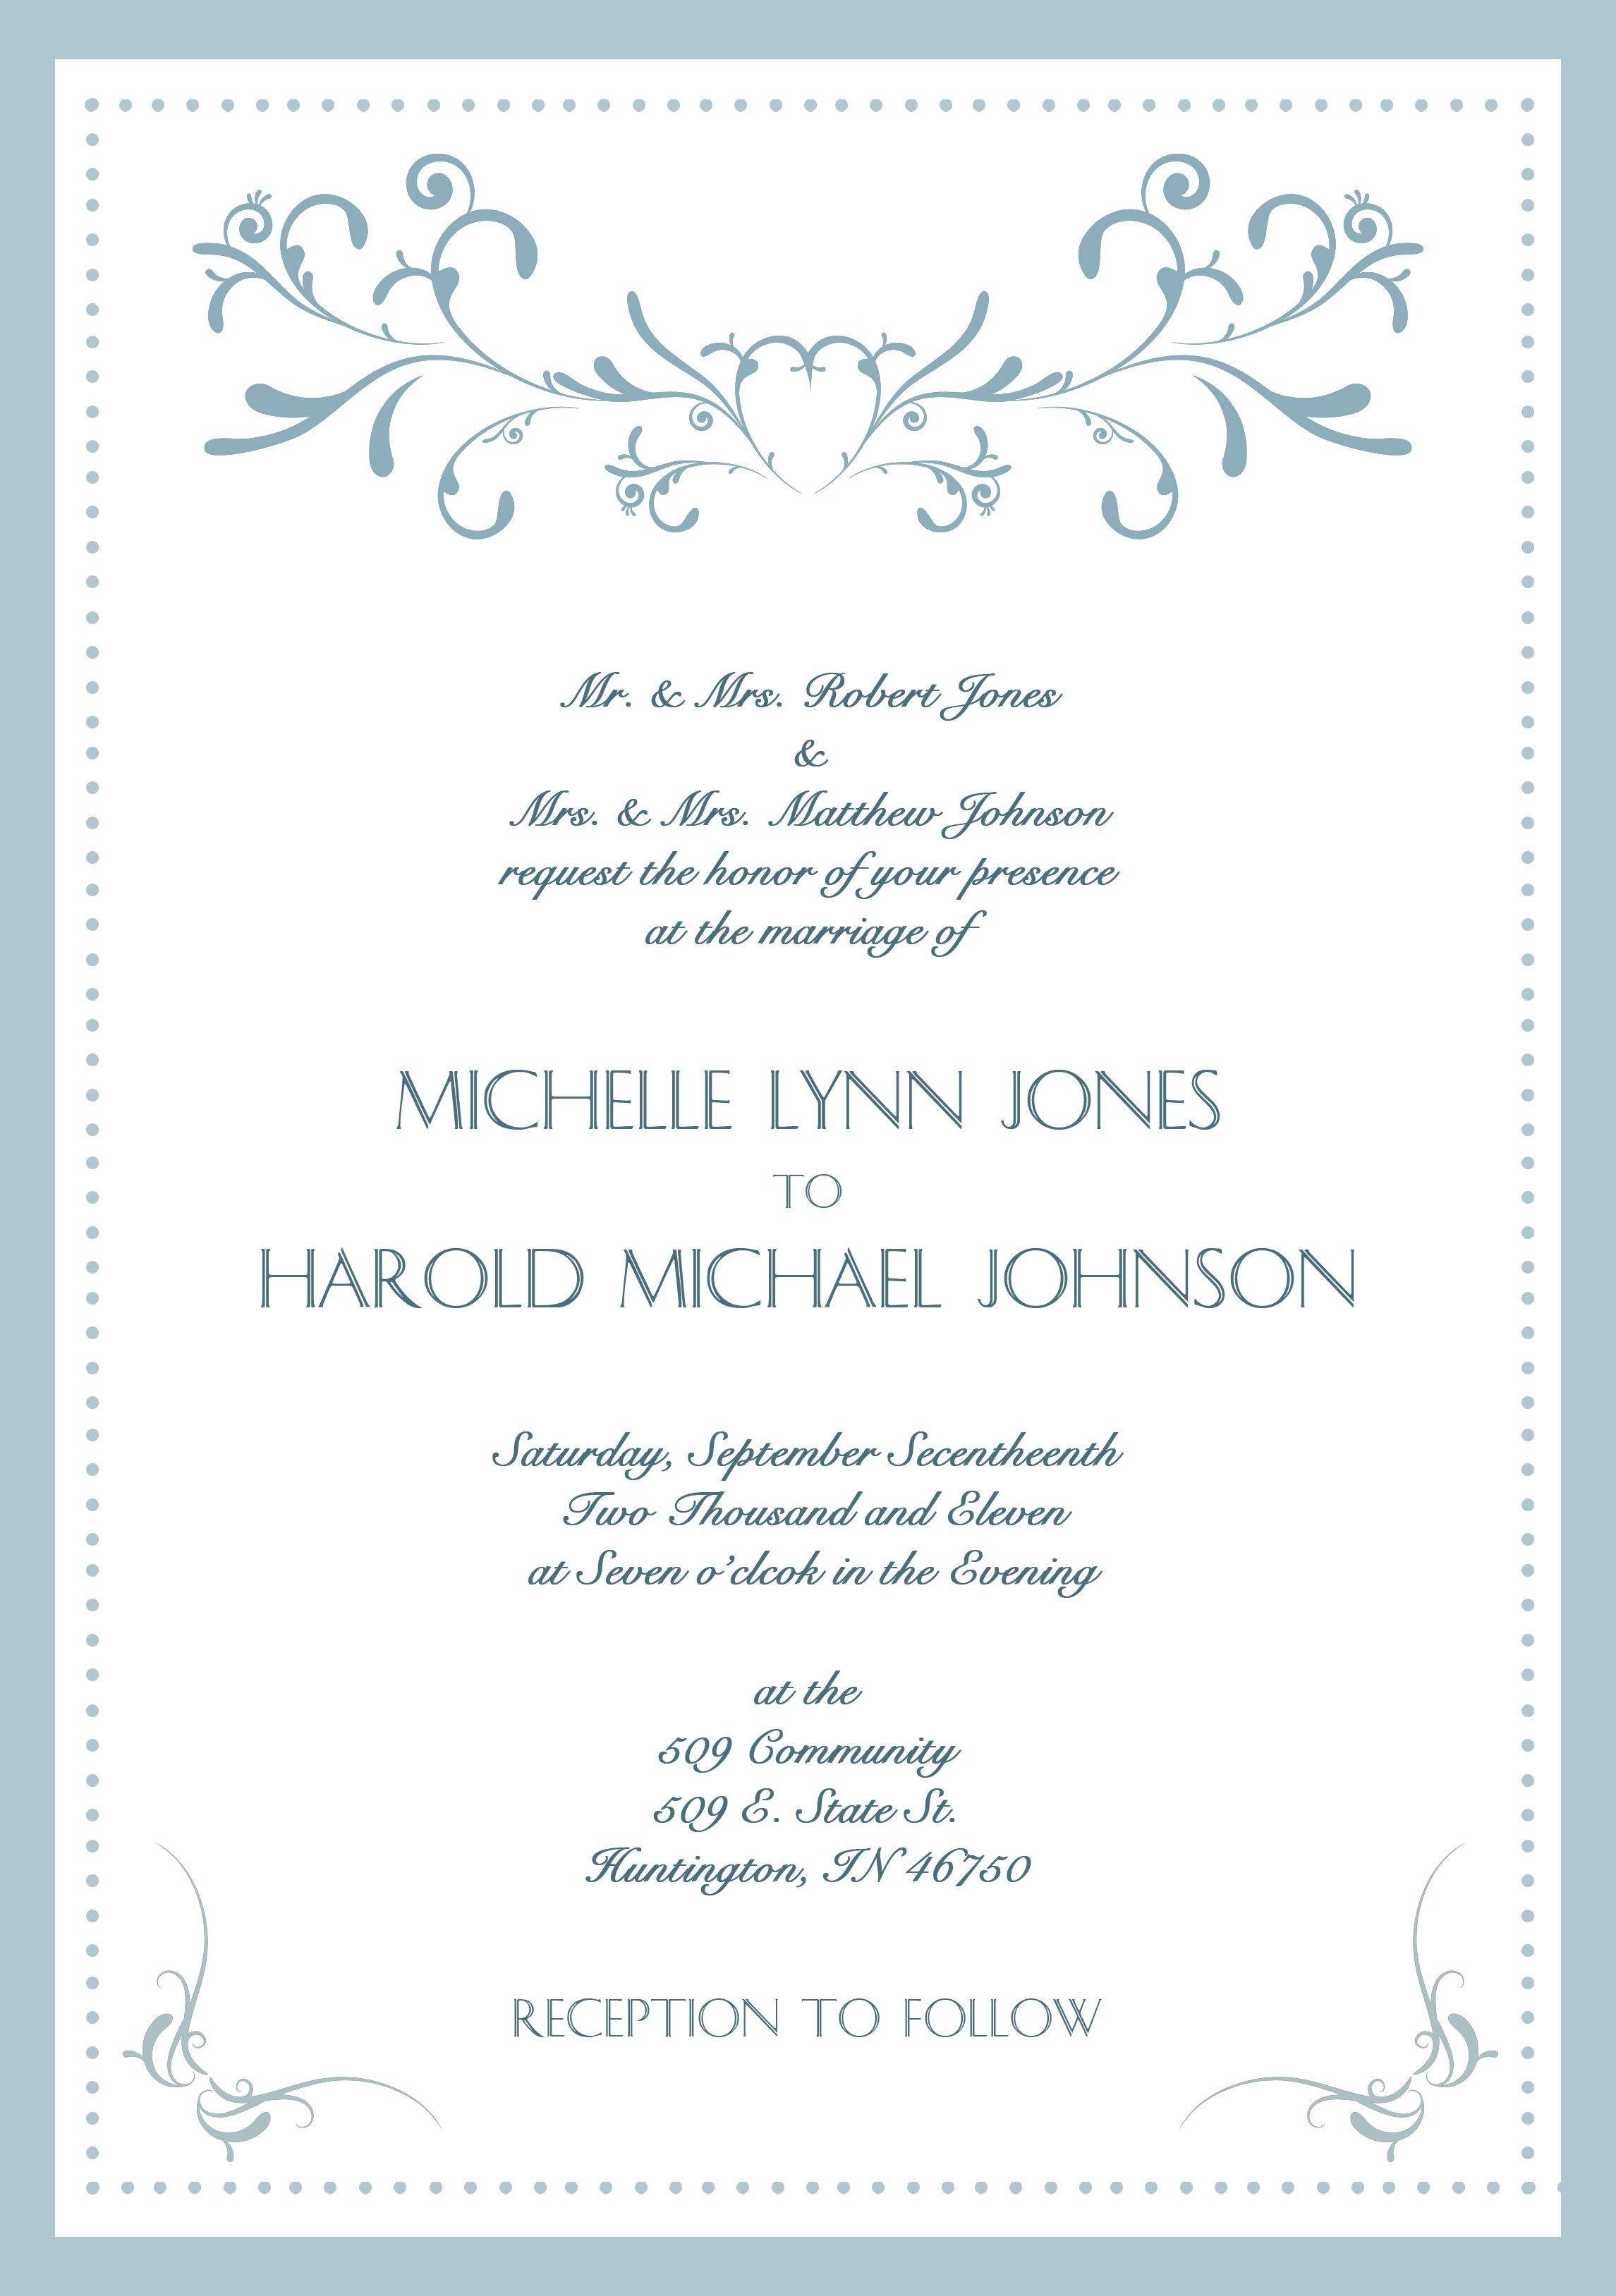 Formal Invitation Writing Format Invitation Templates Free within dimensions 2291 X 3256